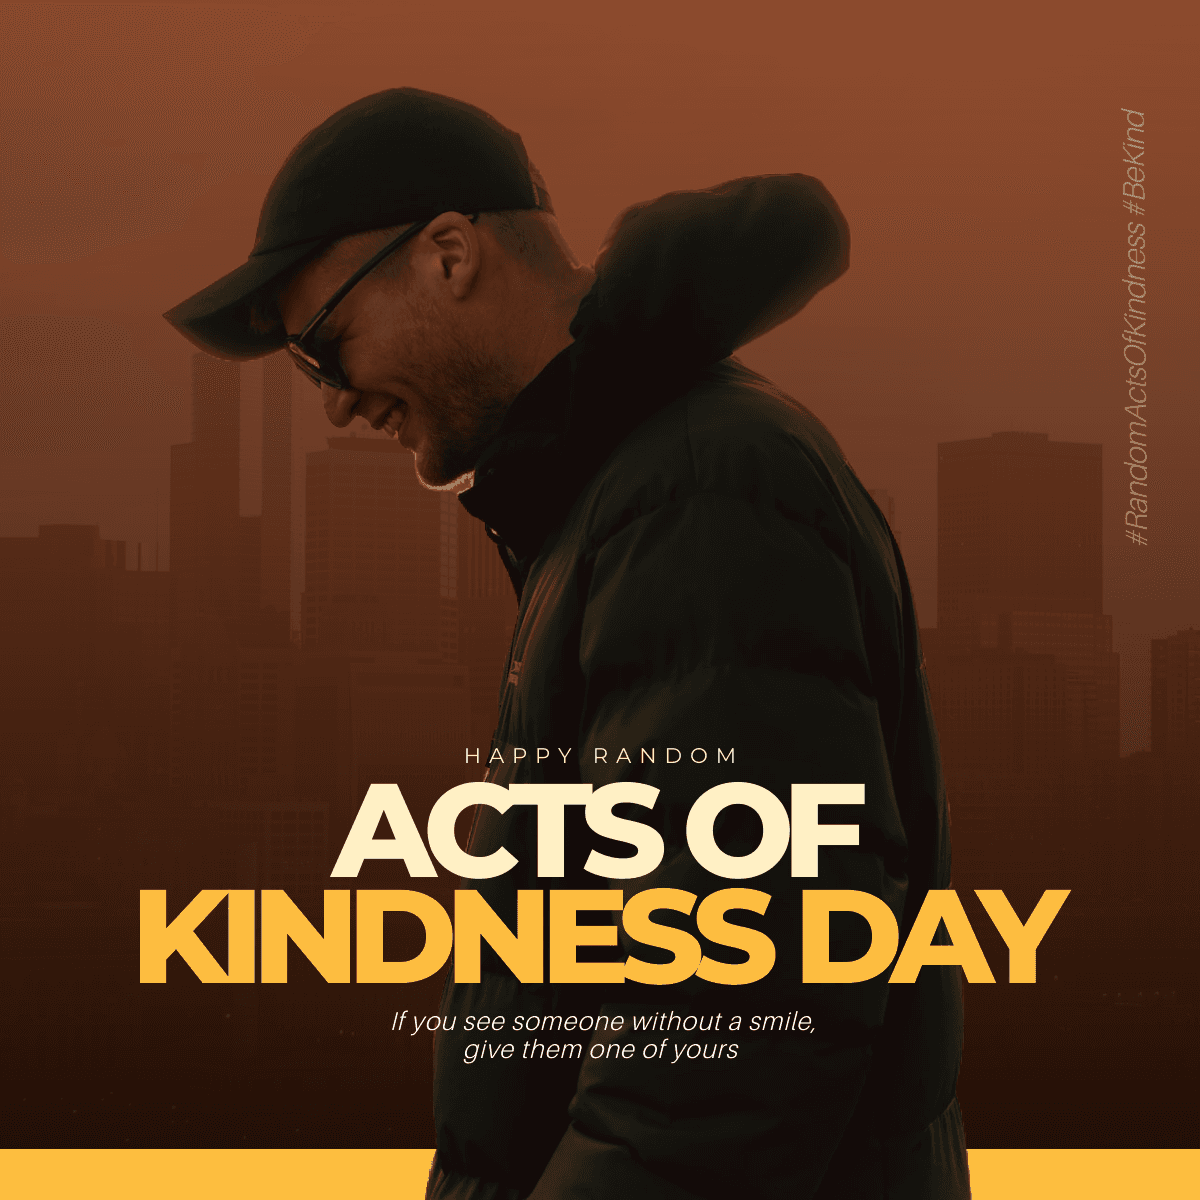 modern-background-random-acts-of-kindness-day-linkedin-post-template-thumbnail-img